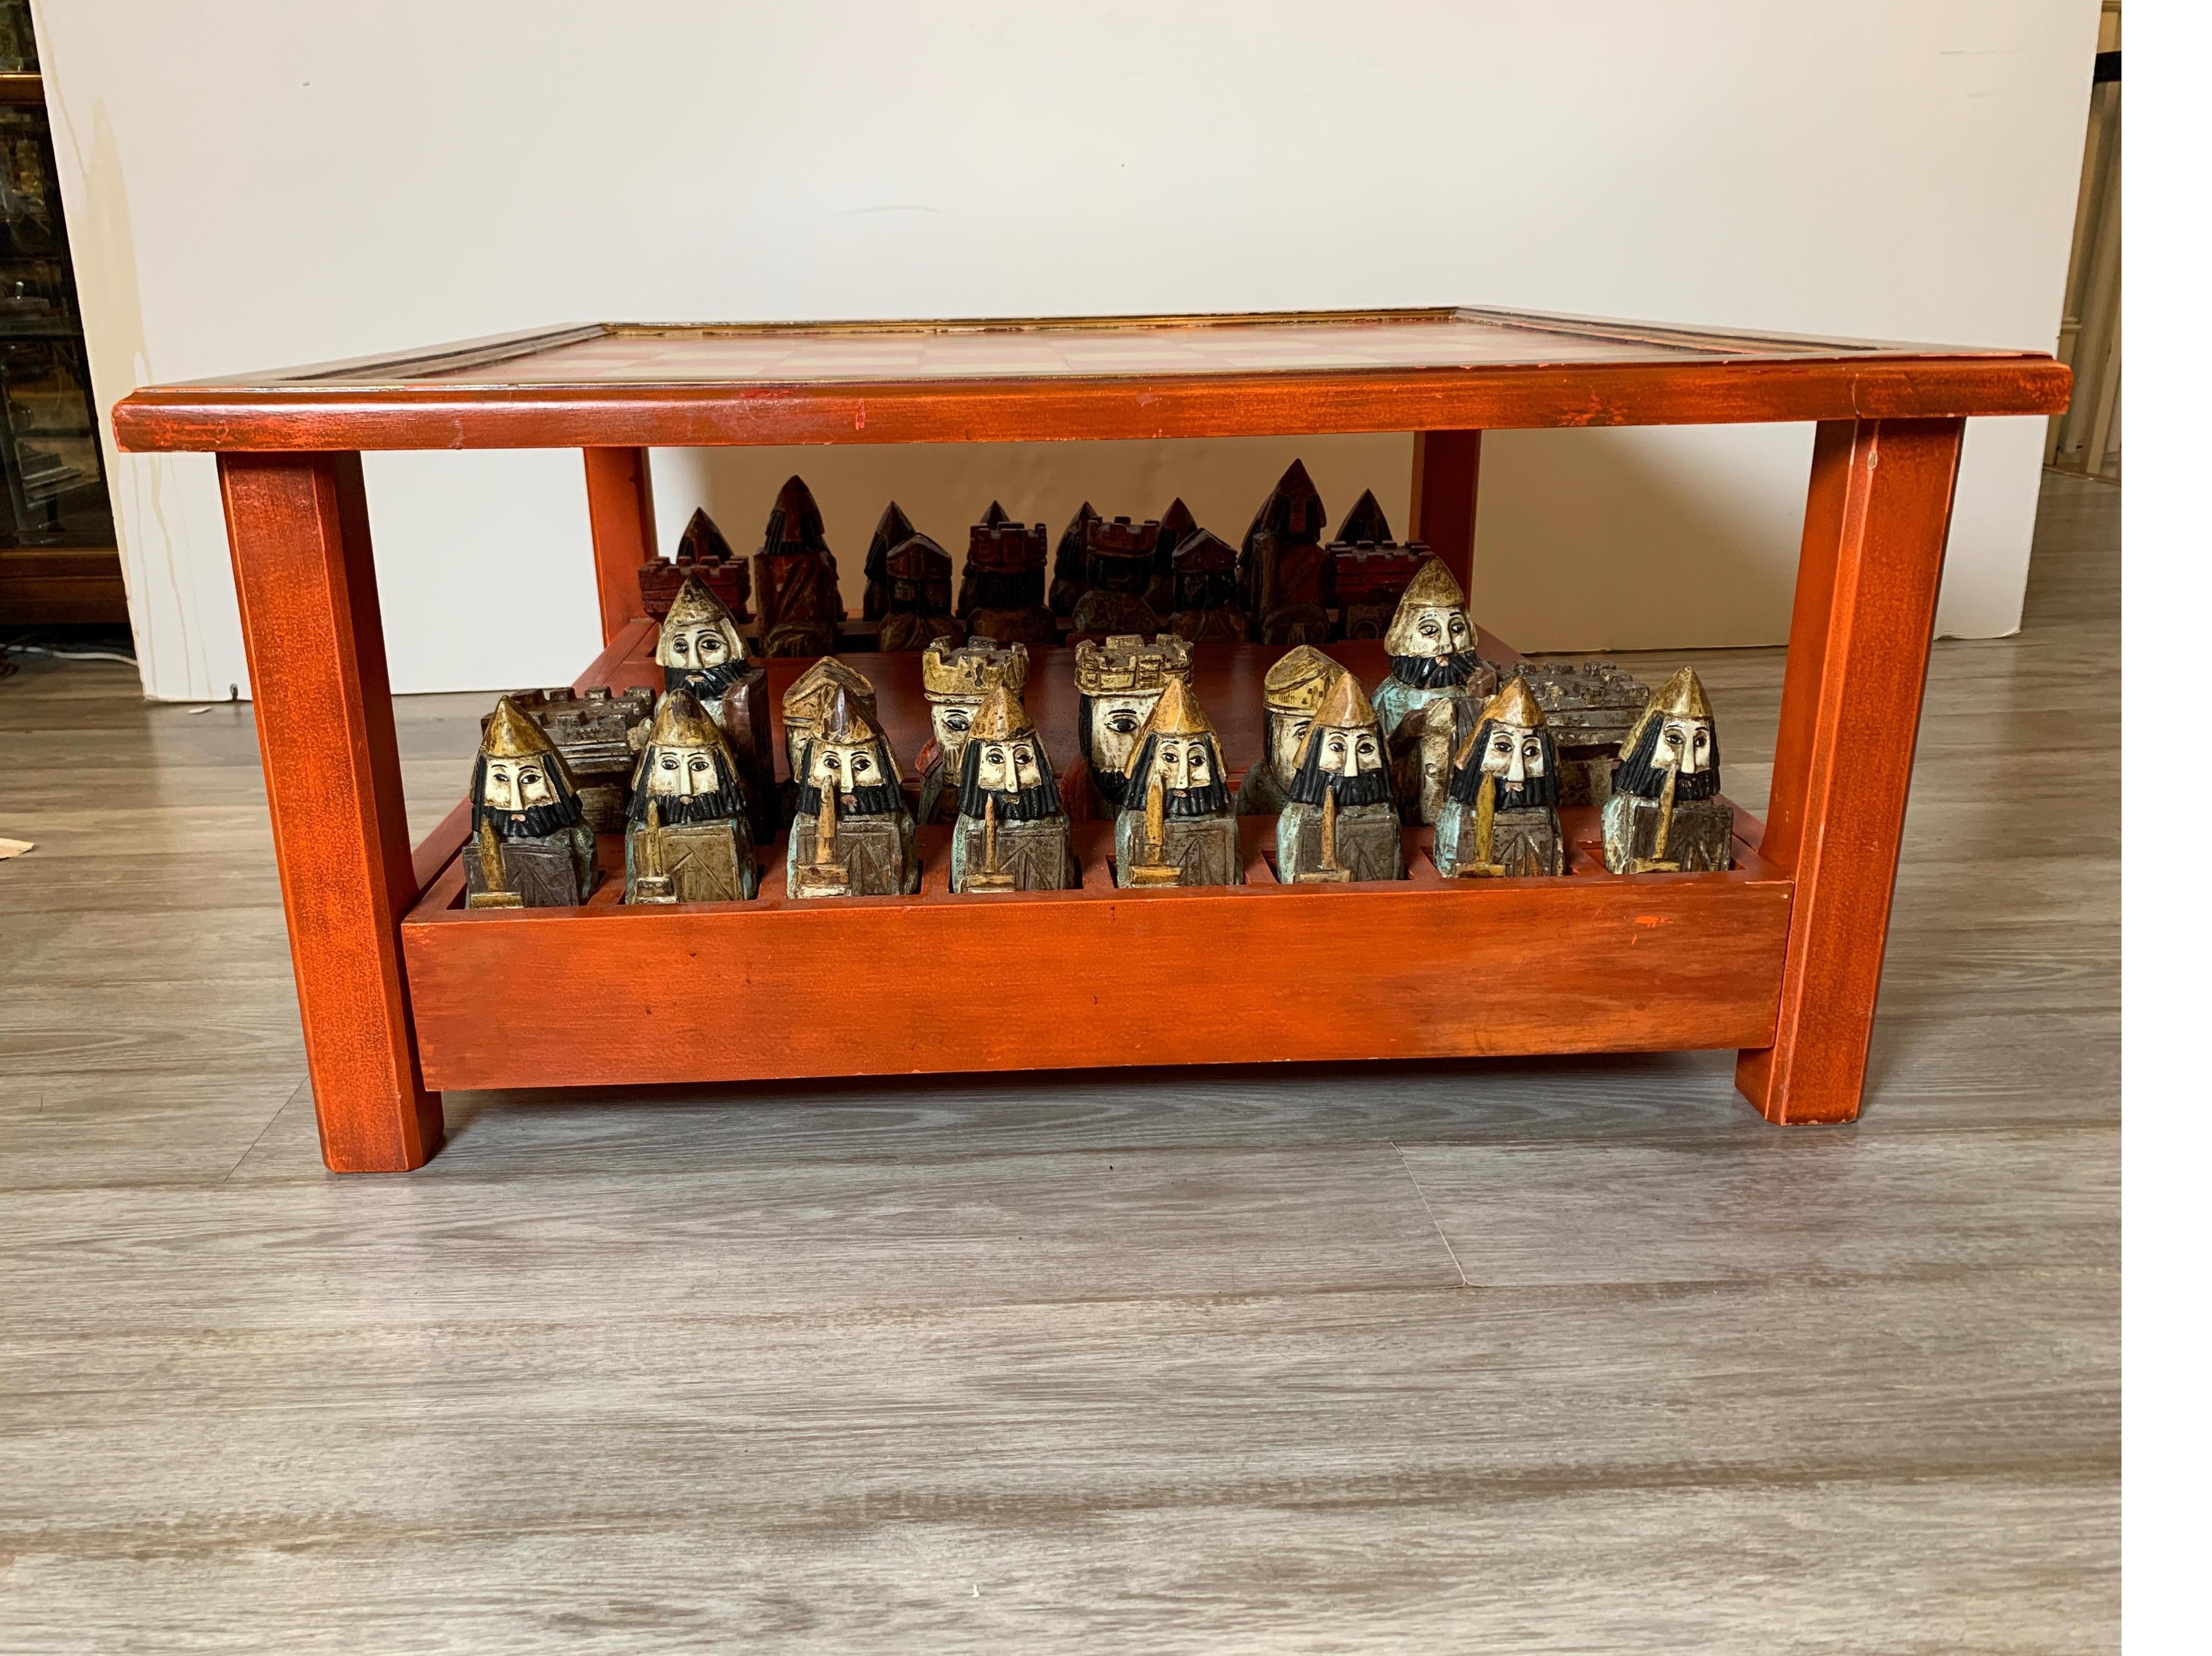 Midcentury Italian hand carved and painted medieval style chess set and table
removable glass top with fitted and slotted drawers for storage of figures.
Can also be used as cocktail/coffee table. Great addition to any game room
and conversation